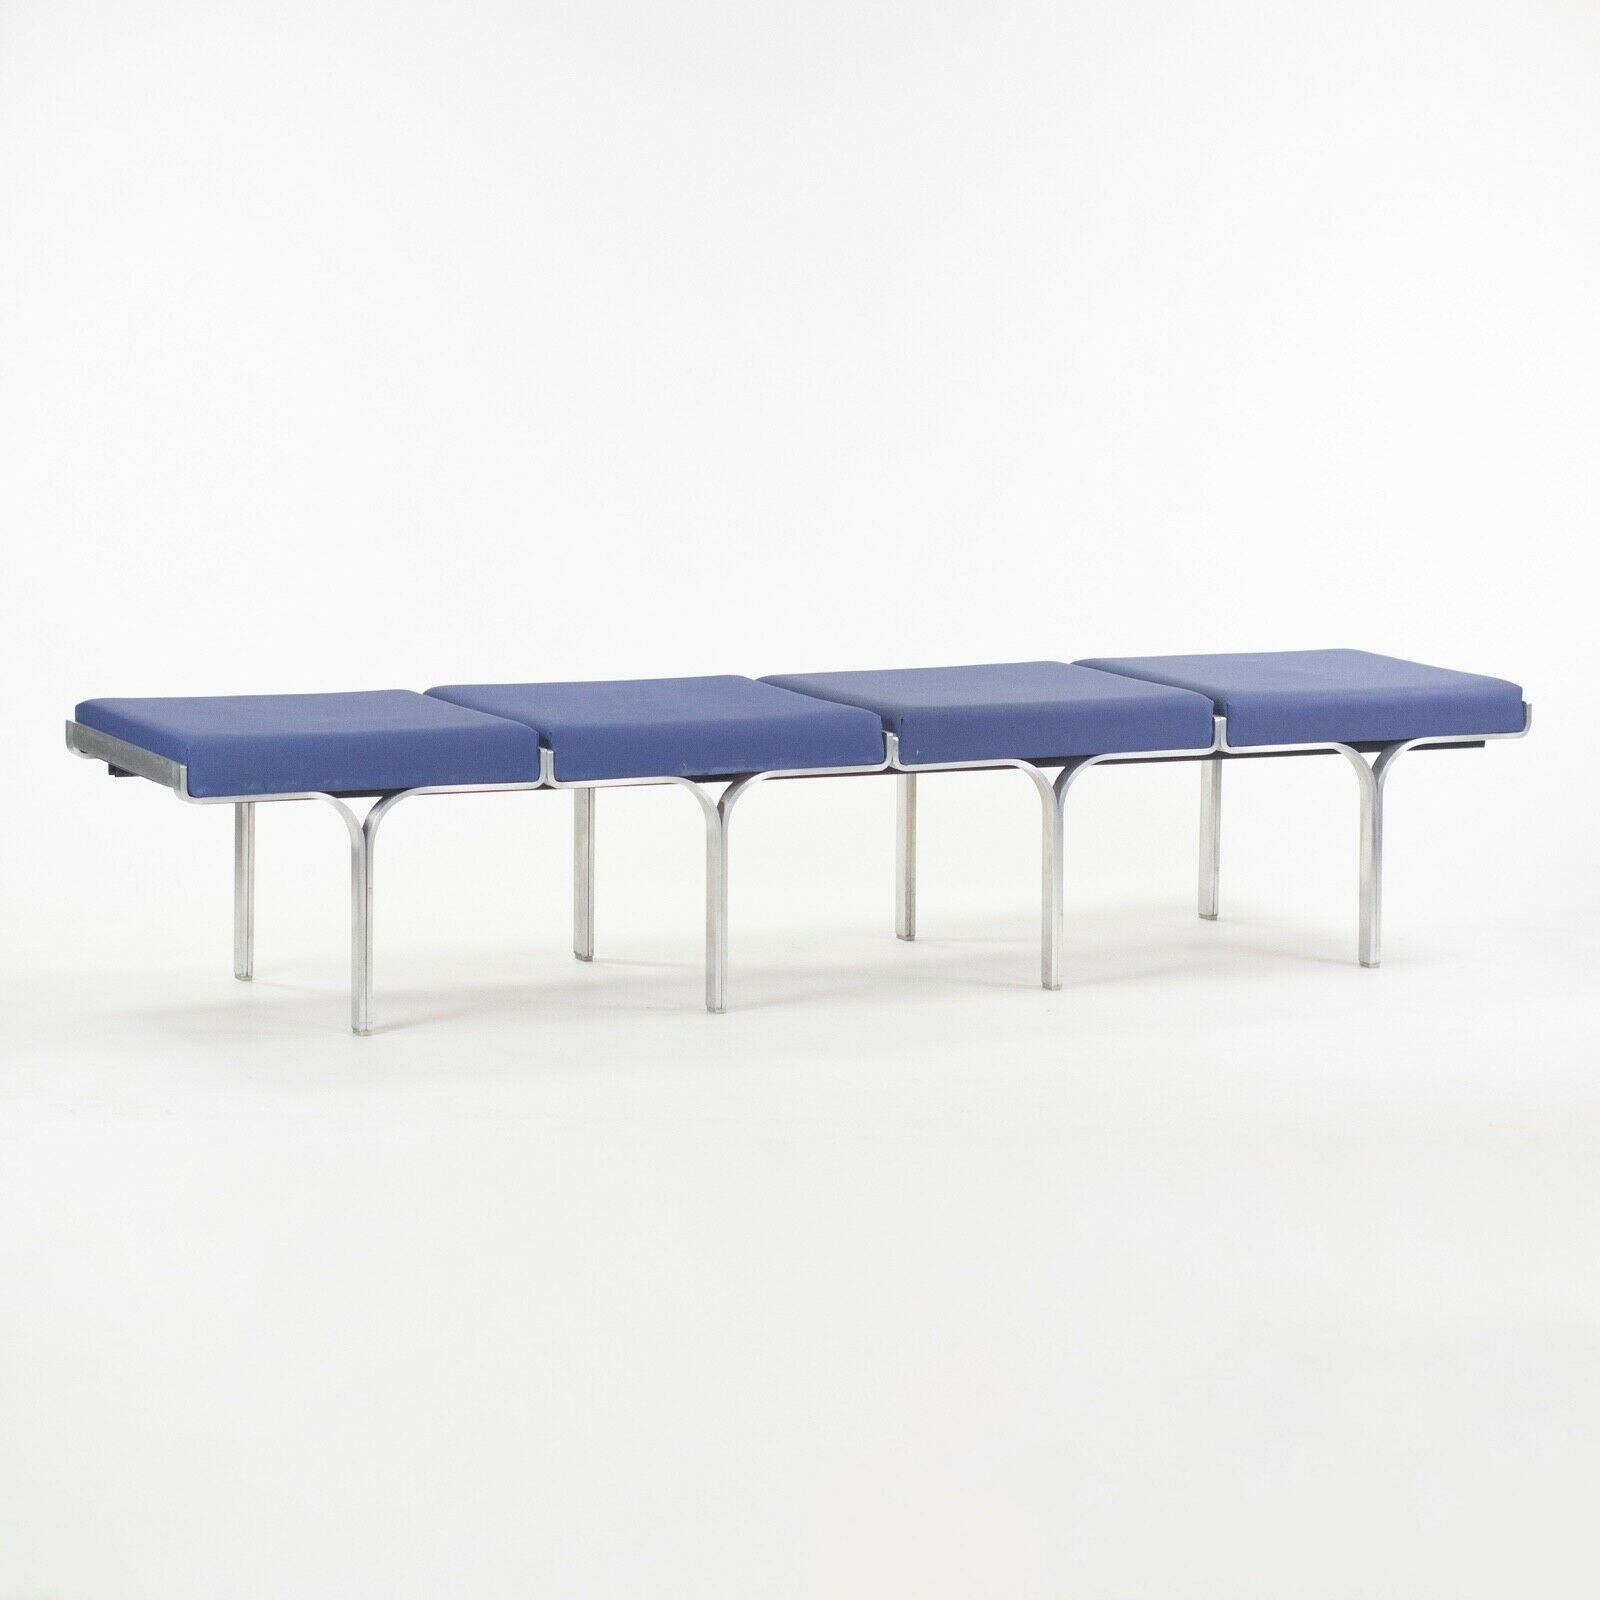 Listed for sale is a gorgeous 4-seater bench (model 656) by John Behringer for Fabry Associates. These iconic benches were used in the TWA terminal, famously designed by Eero Saarinen. This design is also part of the permanent collection at the